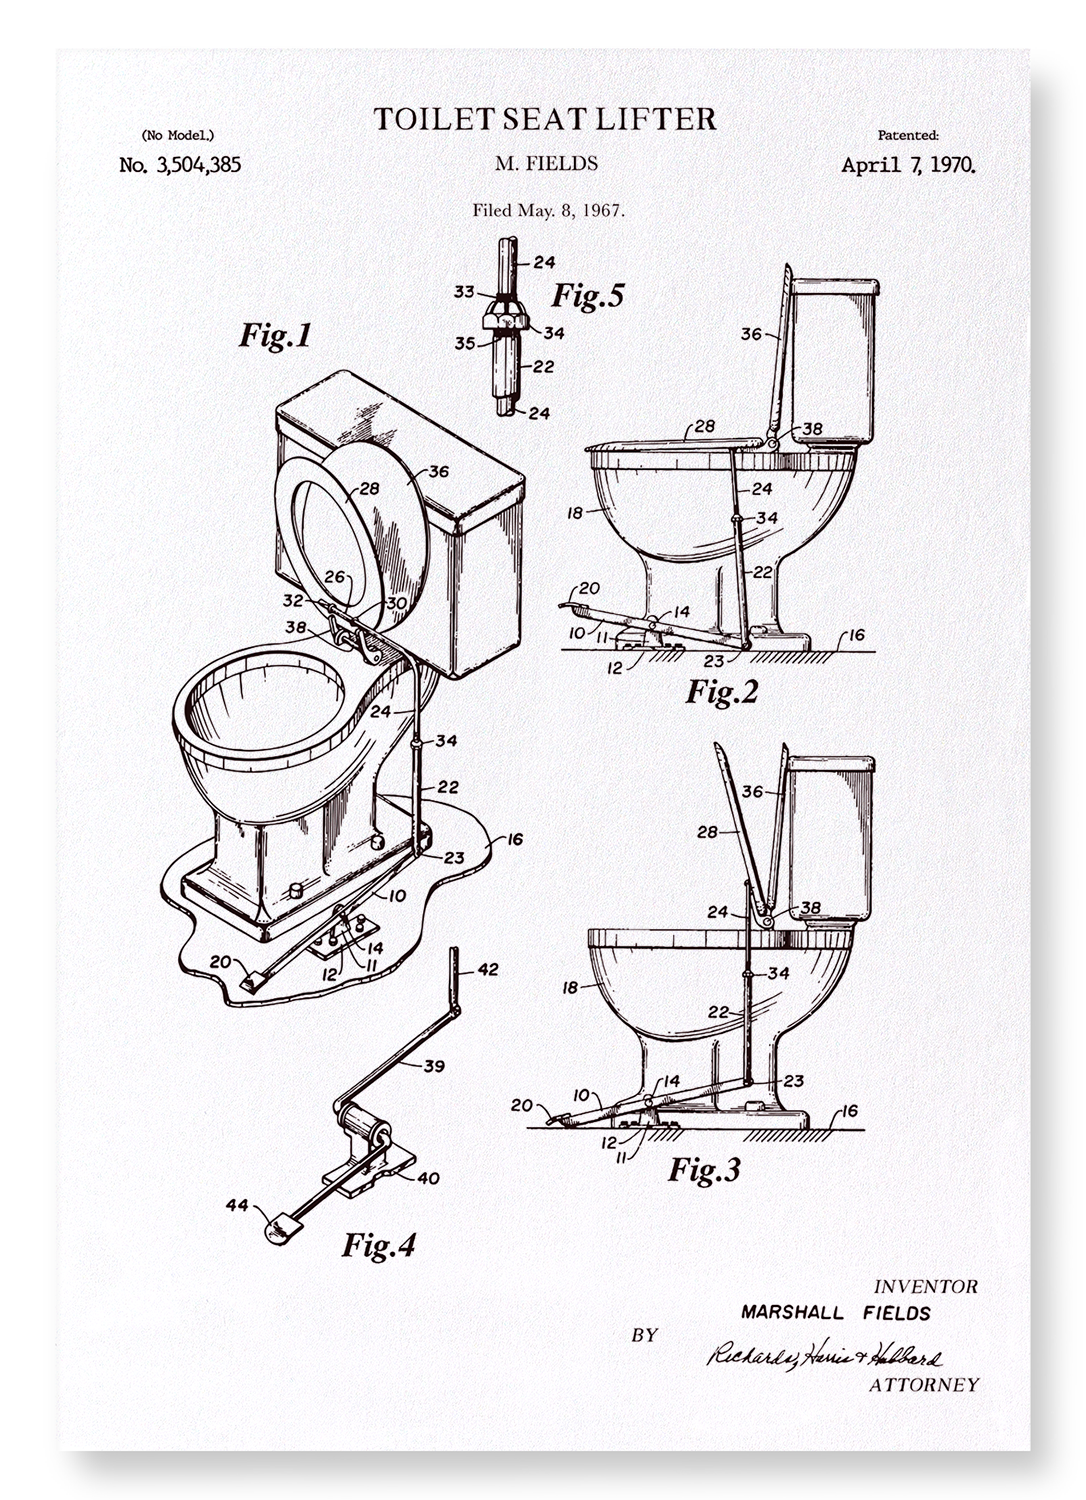 PATENT OF TOILET SEAT LIFTER (1970)